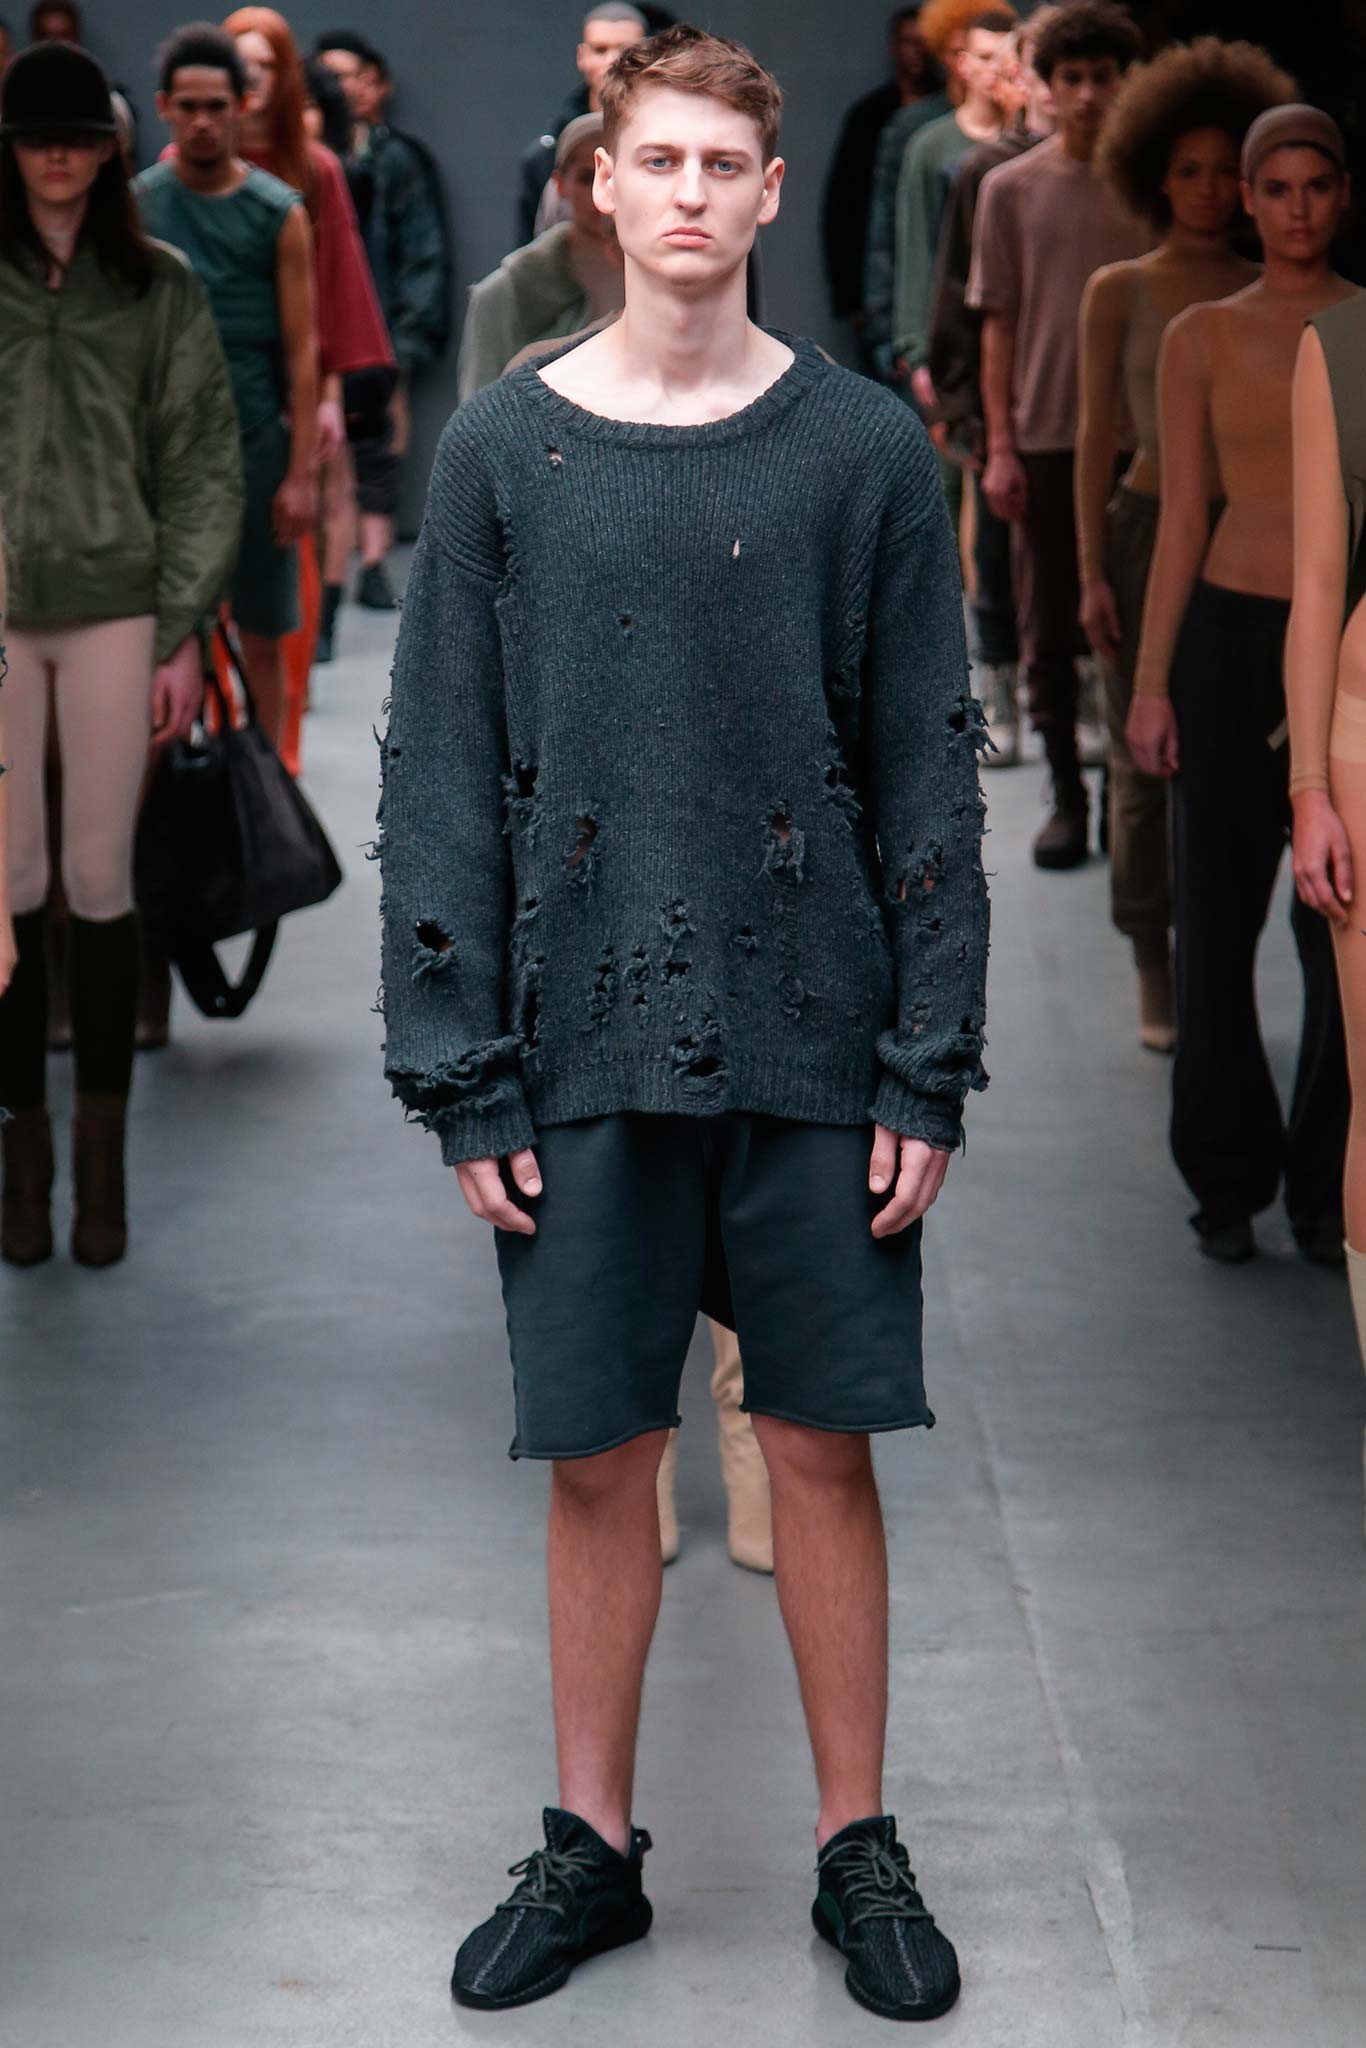 Kanye West Adidas Fall Winter 2015 Mens Collection Photos 016